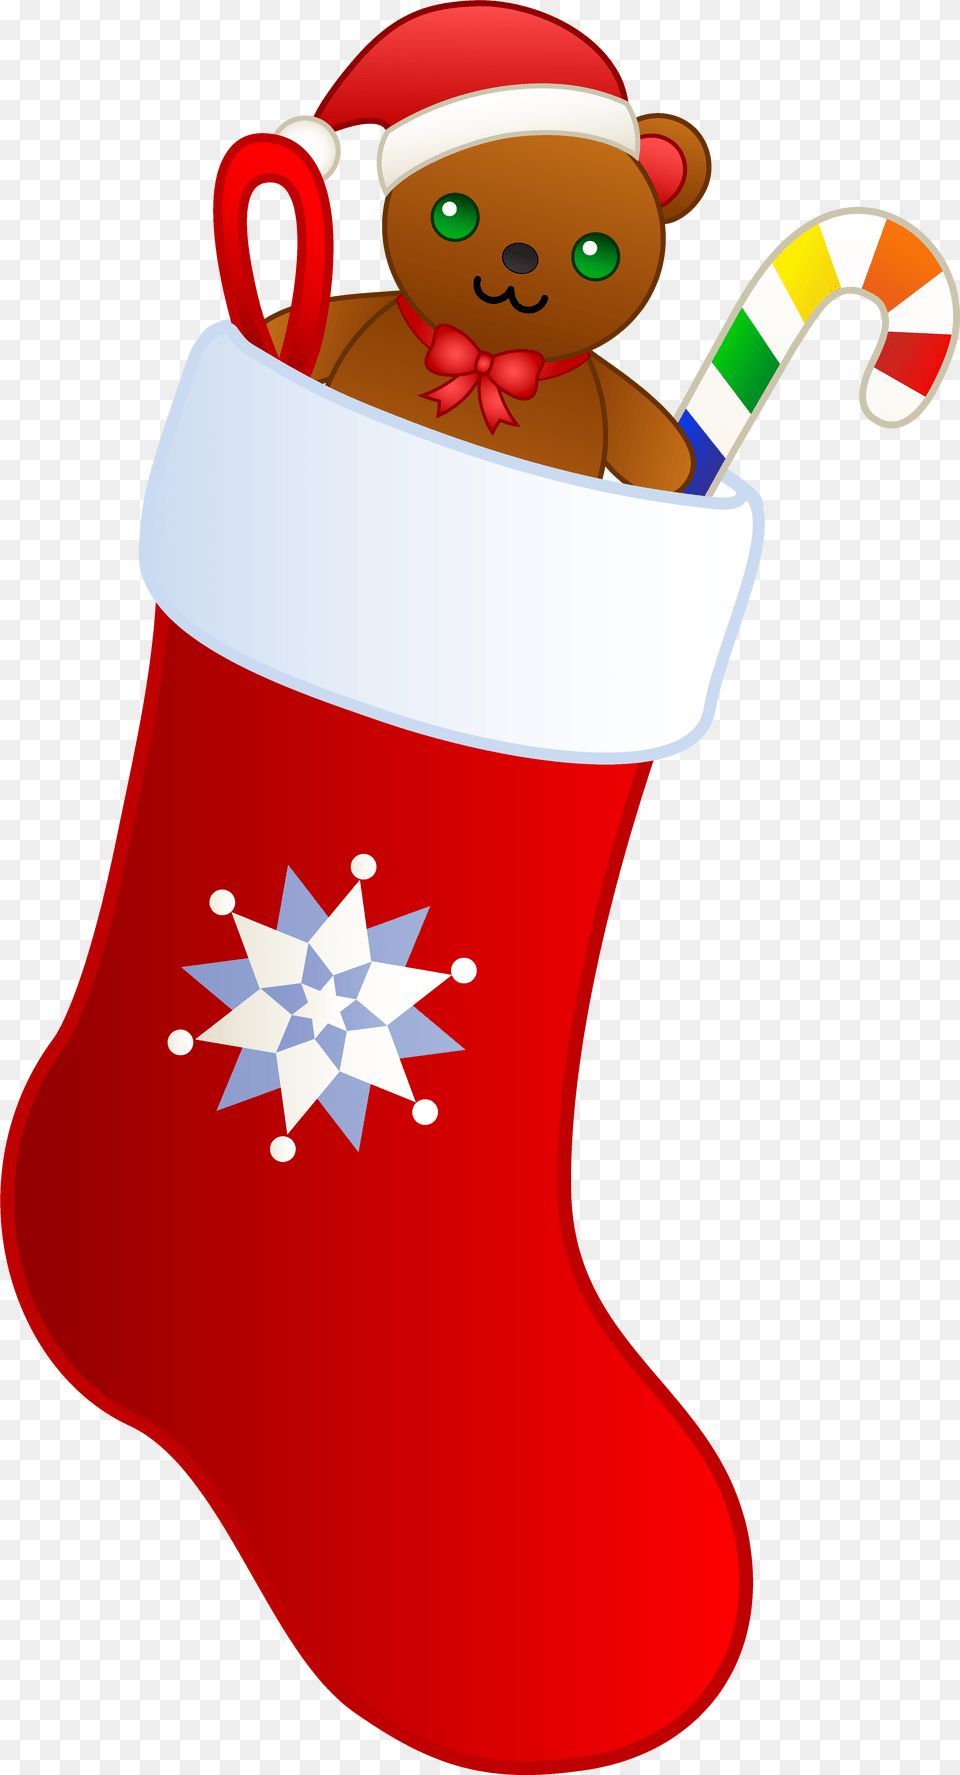 Christmas Stocking With Teddy Christmas Stocking Clipart Transparent Background, Hosiery, Clothing, Gift, Festival Png Image